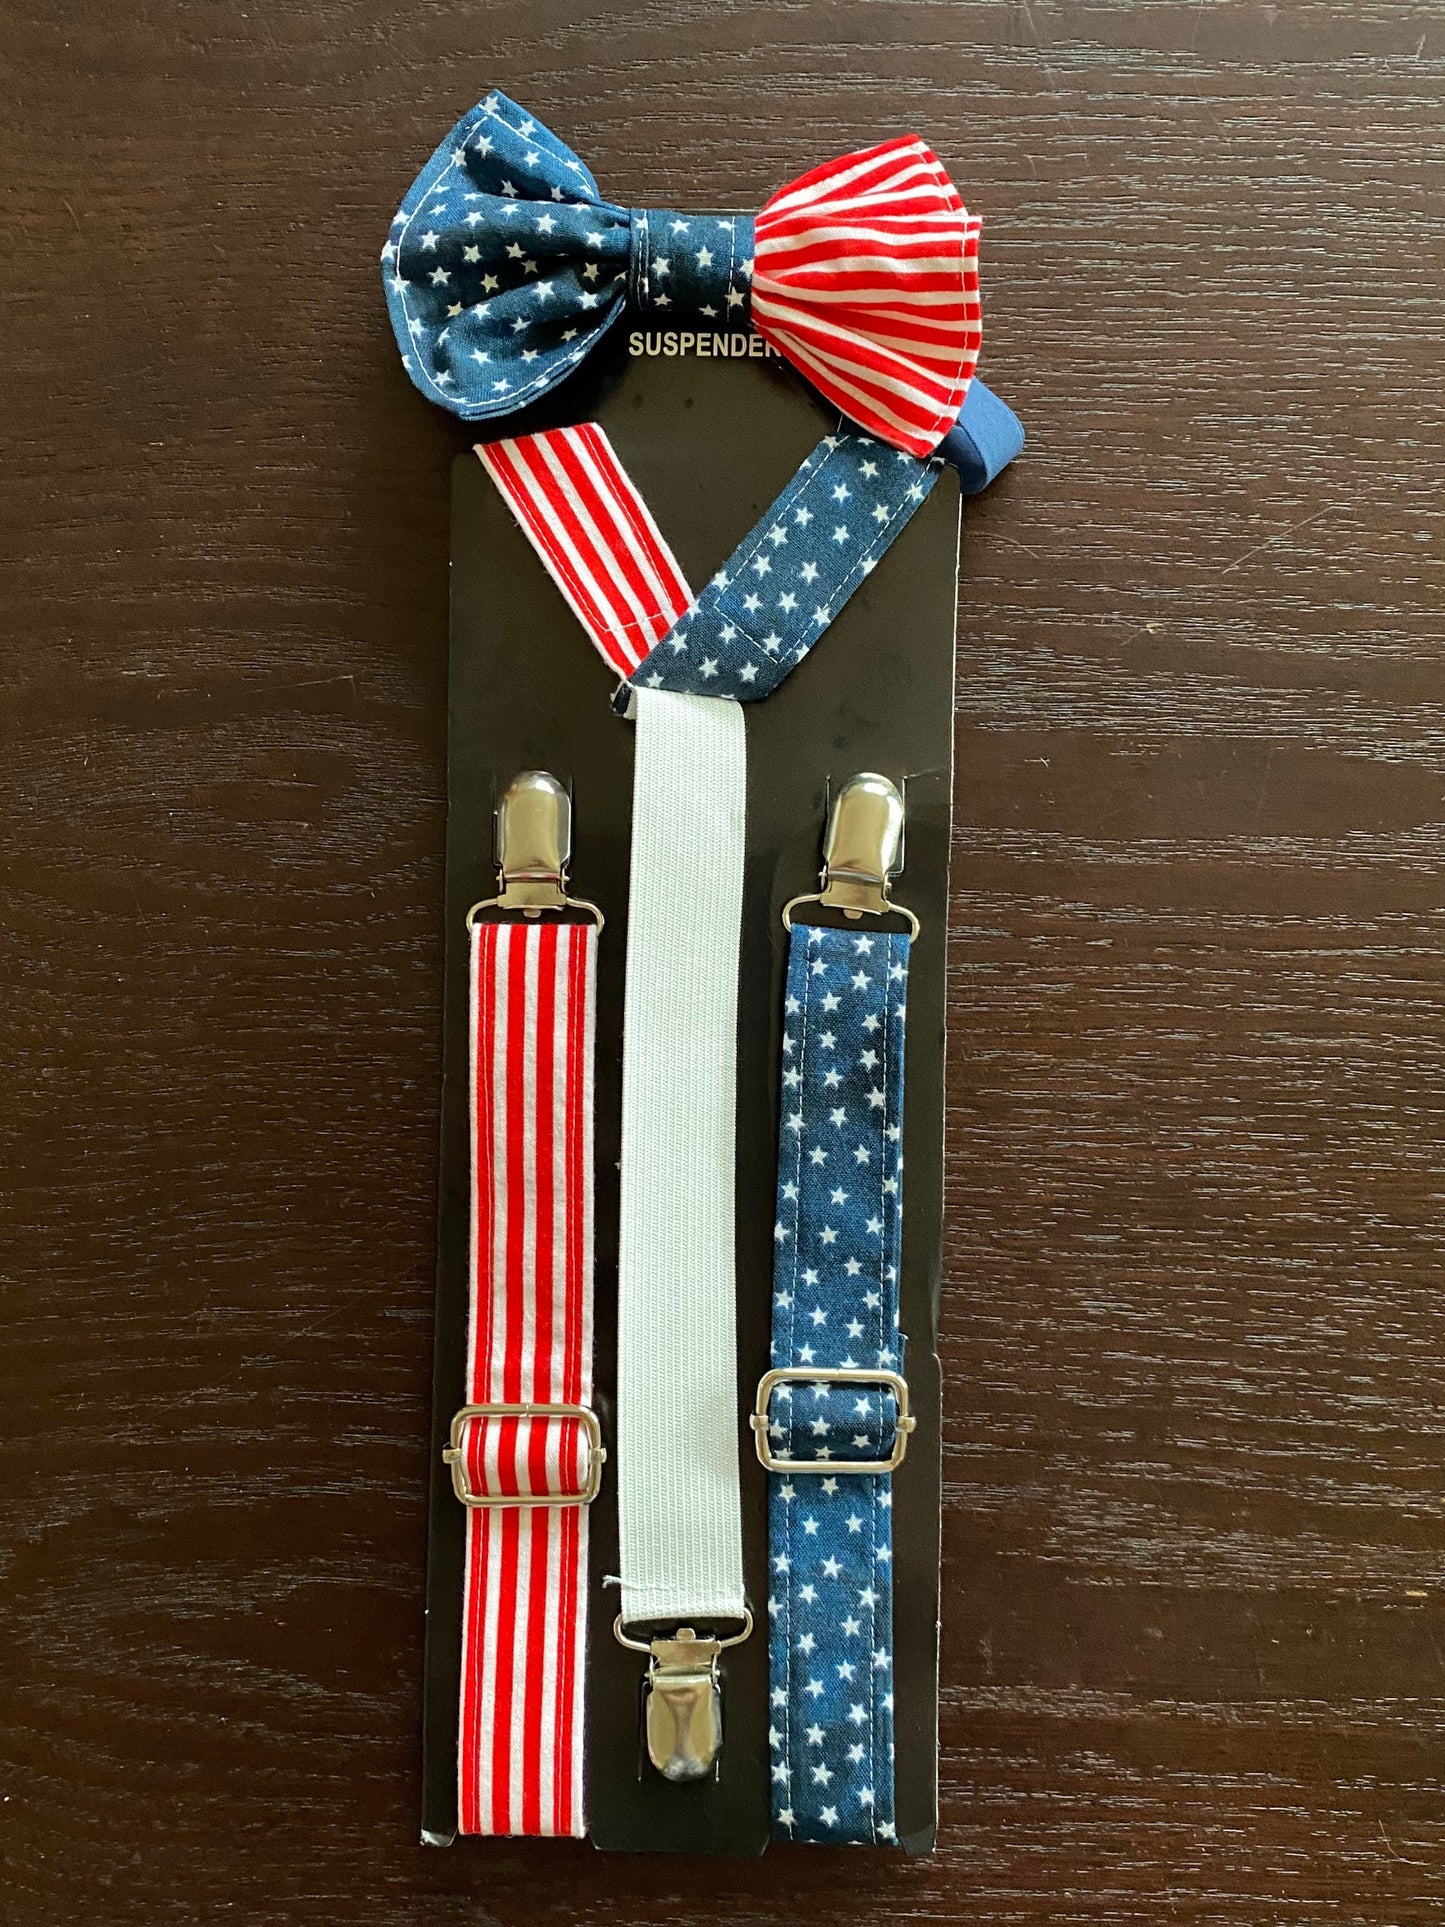 Patriotic American flag bow tie and suspenders custom bowtie all sizes made to order